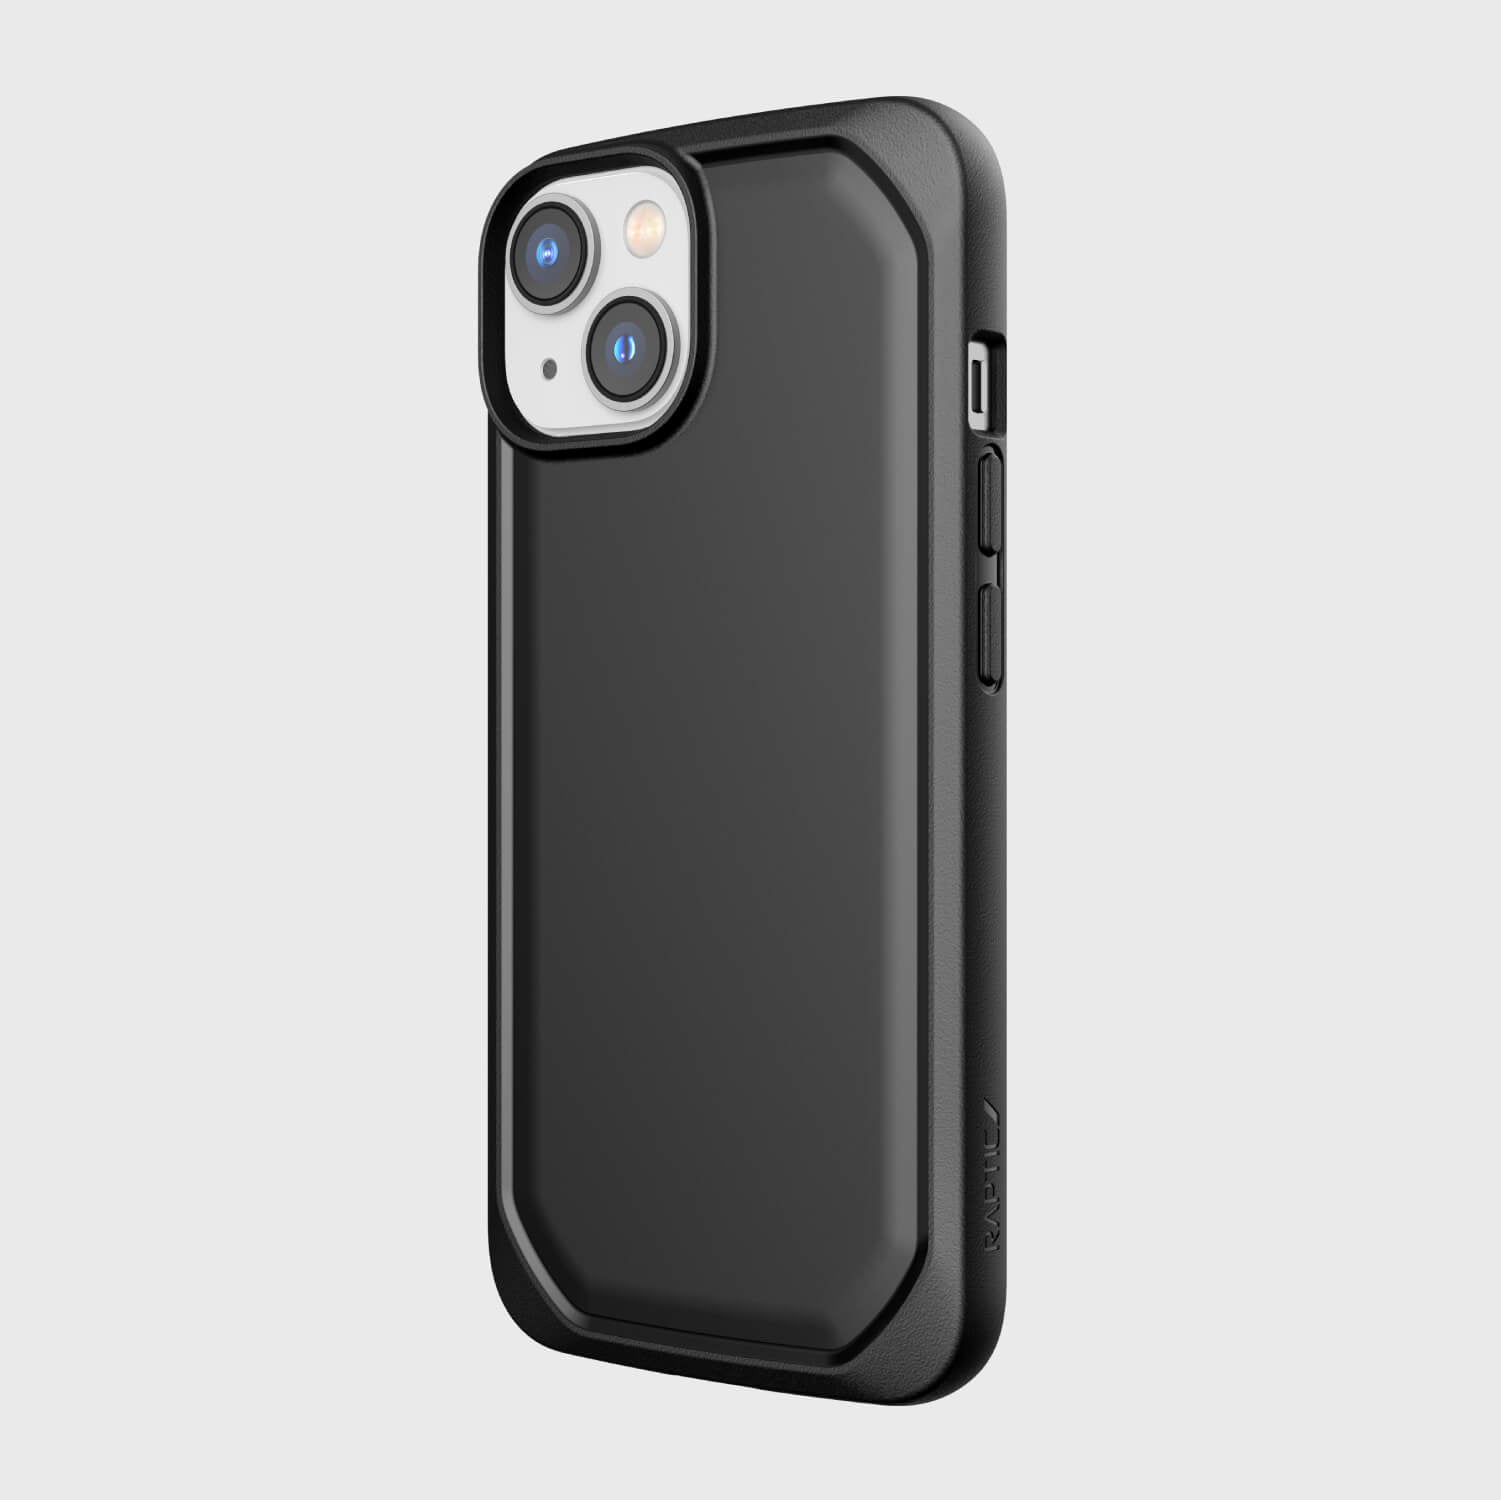 The back view of the iPhone 14 Slim Case - Raptic Slim, featuring texturing depth.